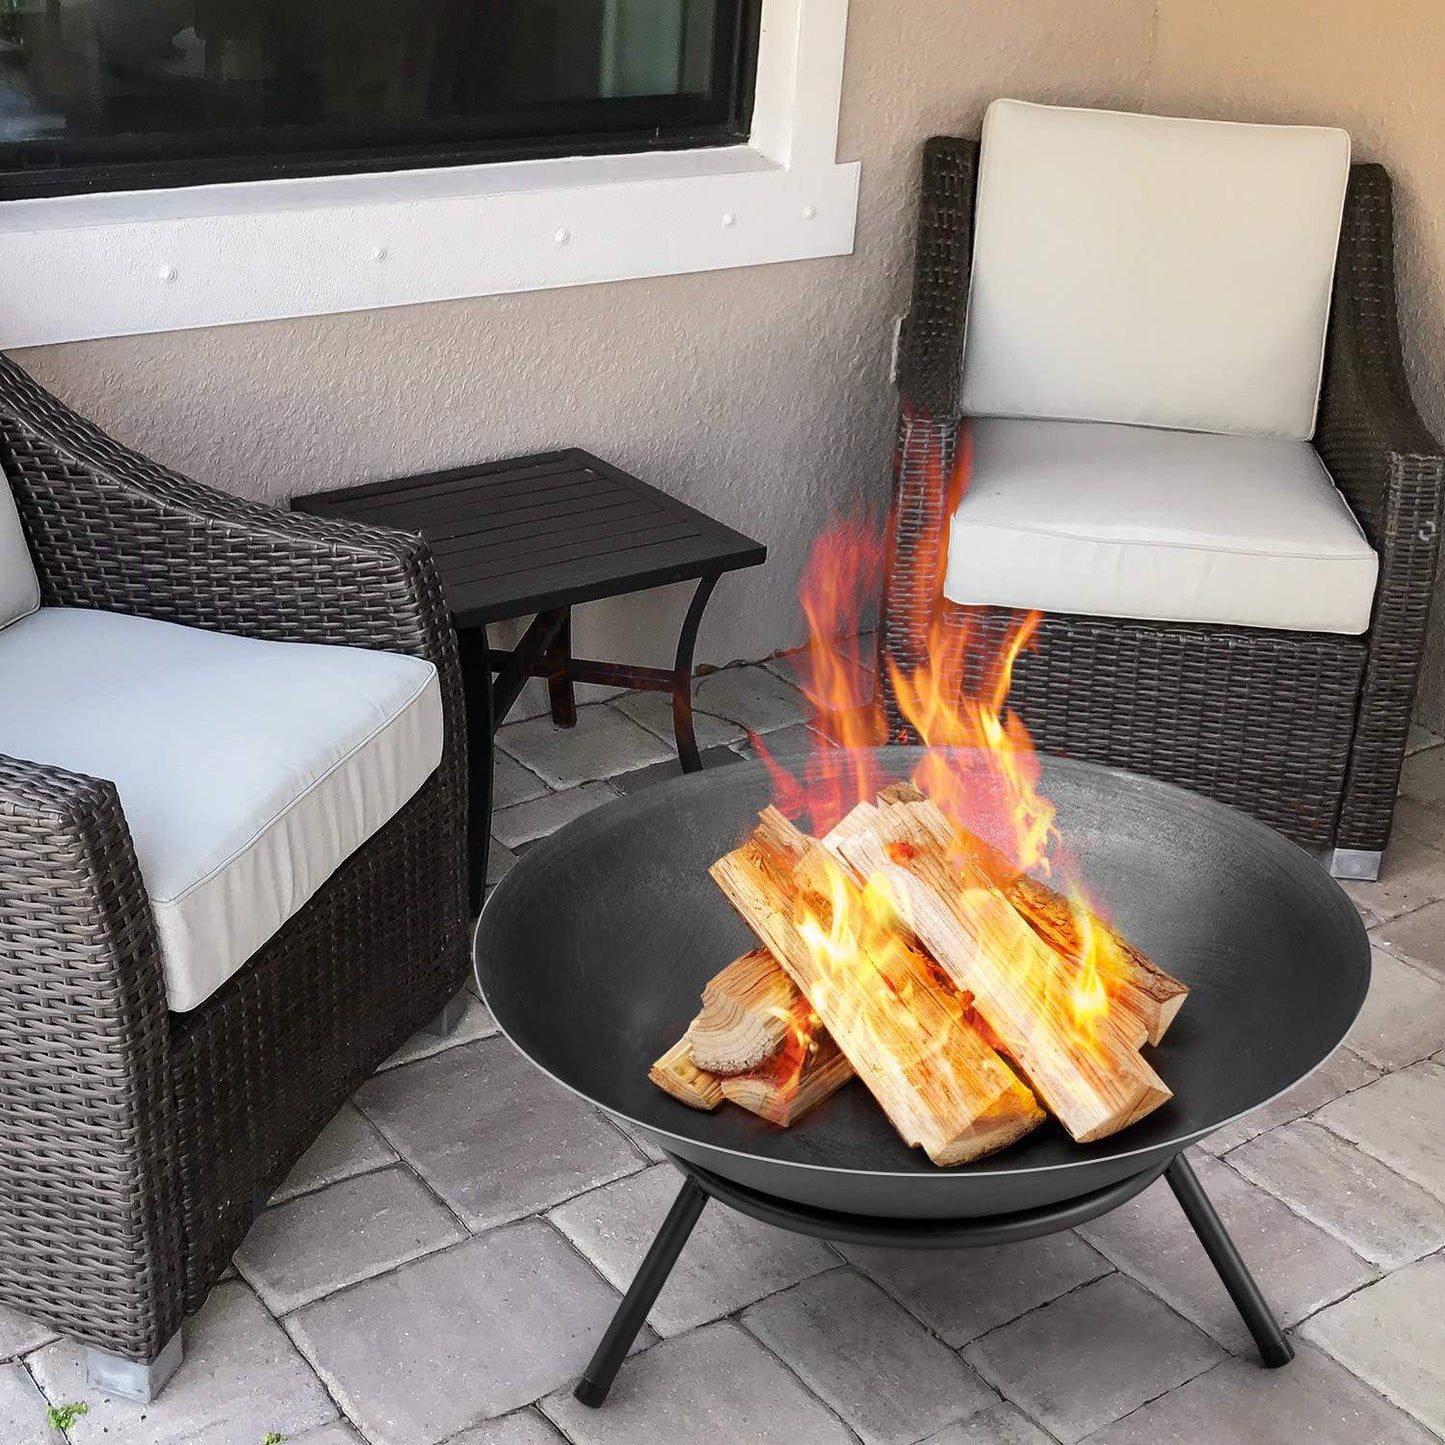 Amagabeli Fire Pit Outdoor Wood Burning 22.6in Firepit Firebowl Fireplace Heater Log Charcoal Burner Extra Deep Large Round Camping Outside Patio Backyard Deck Heavy Duty Metal Grate ET288